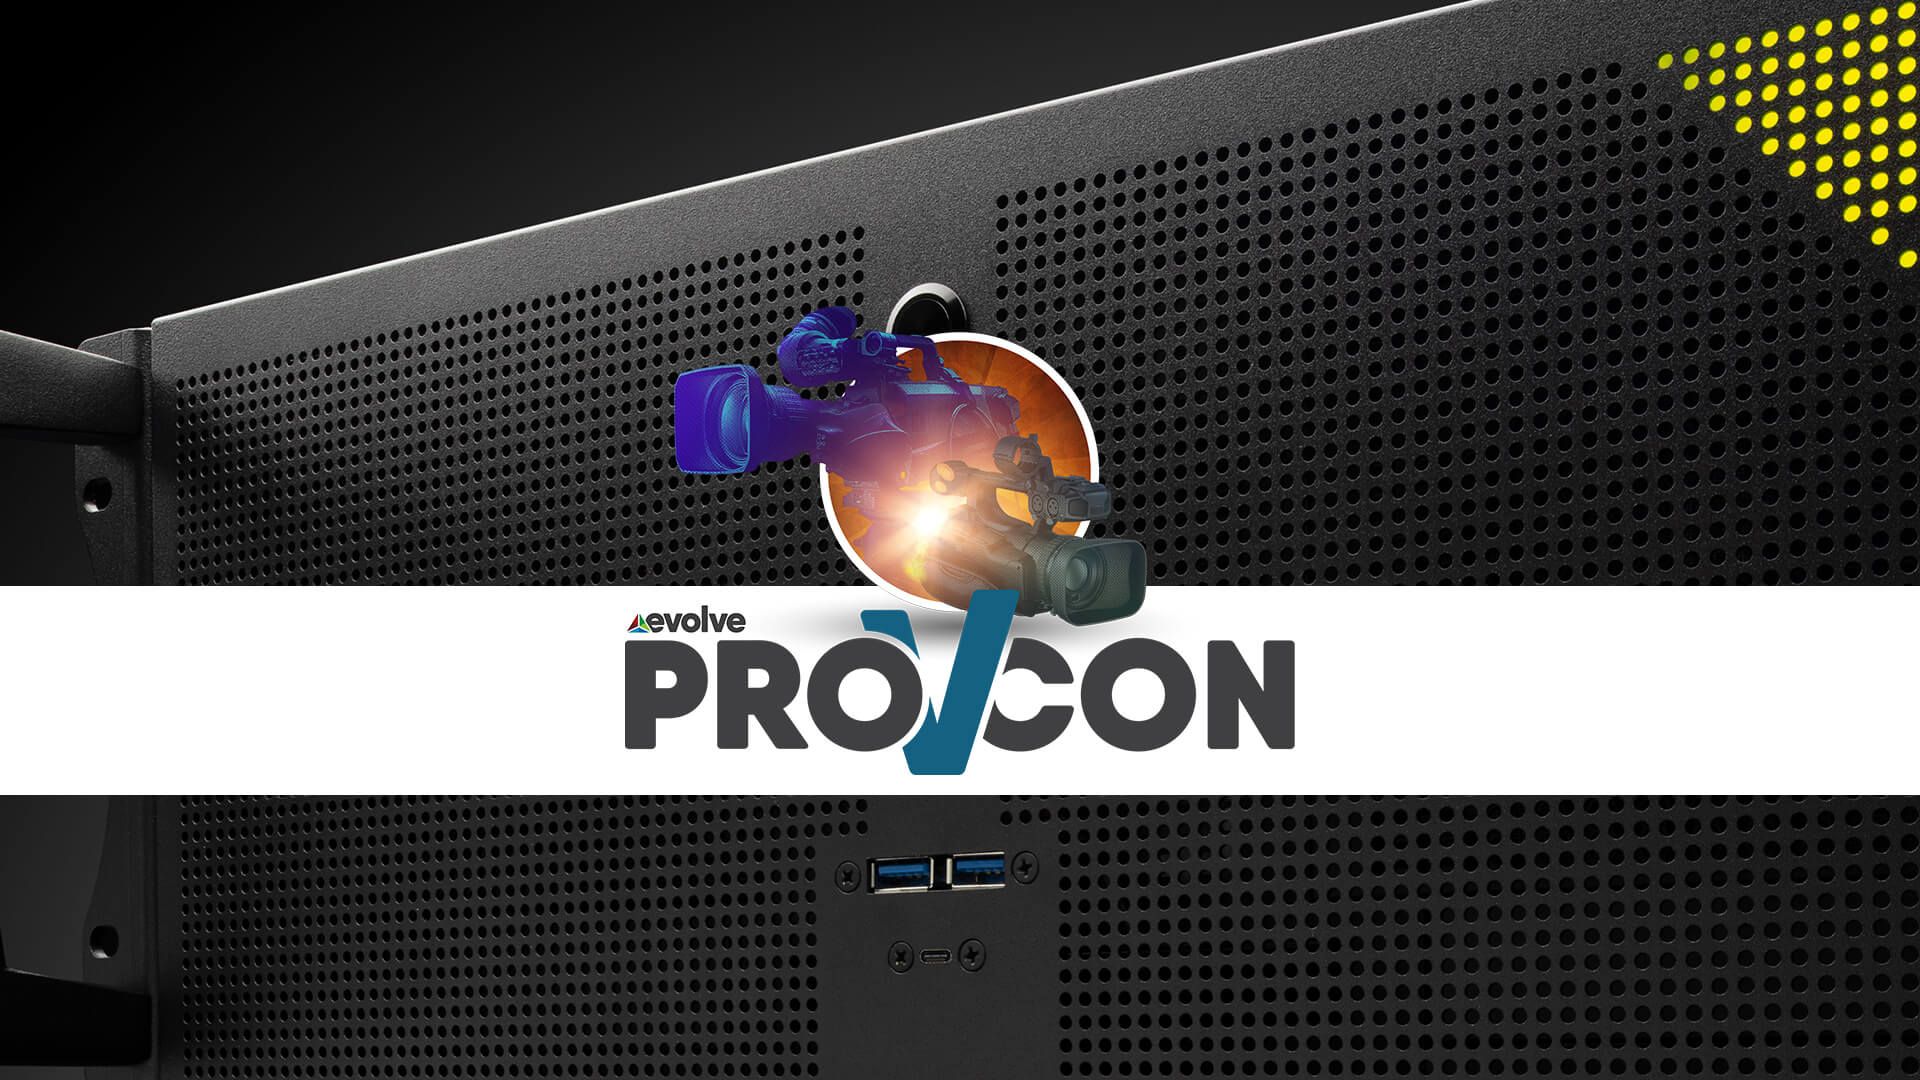 The logo for procon on a black background.